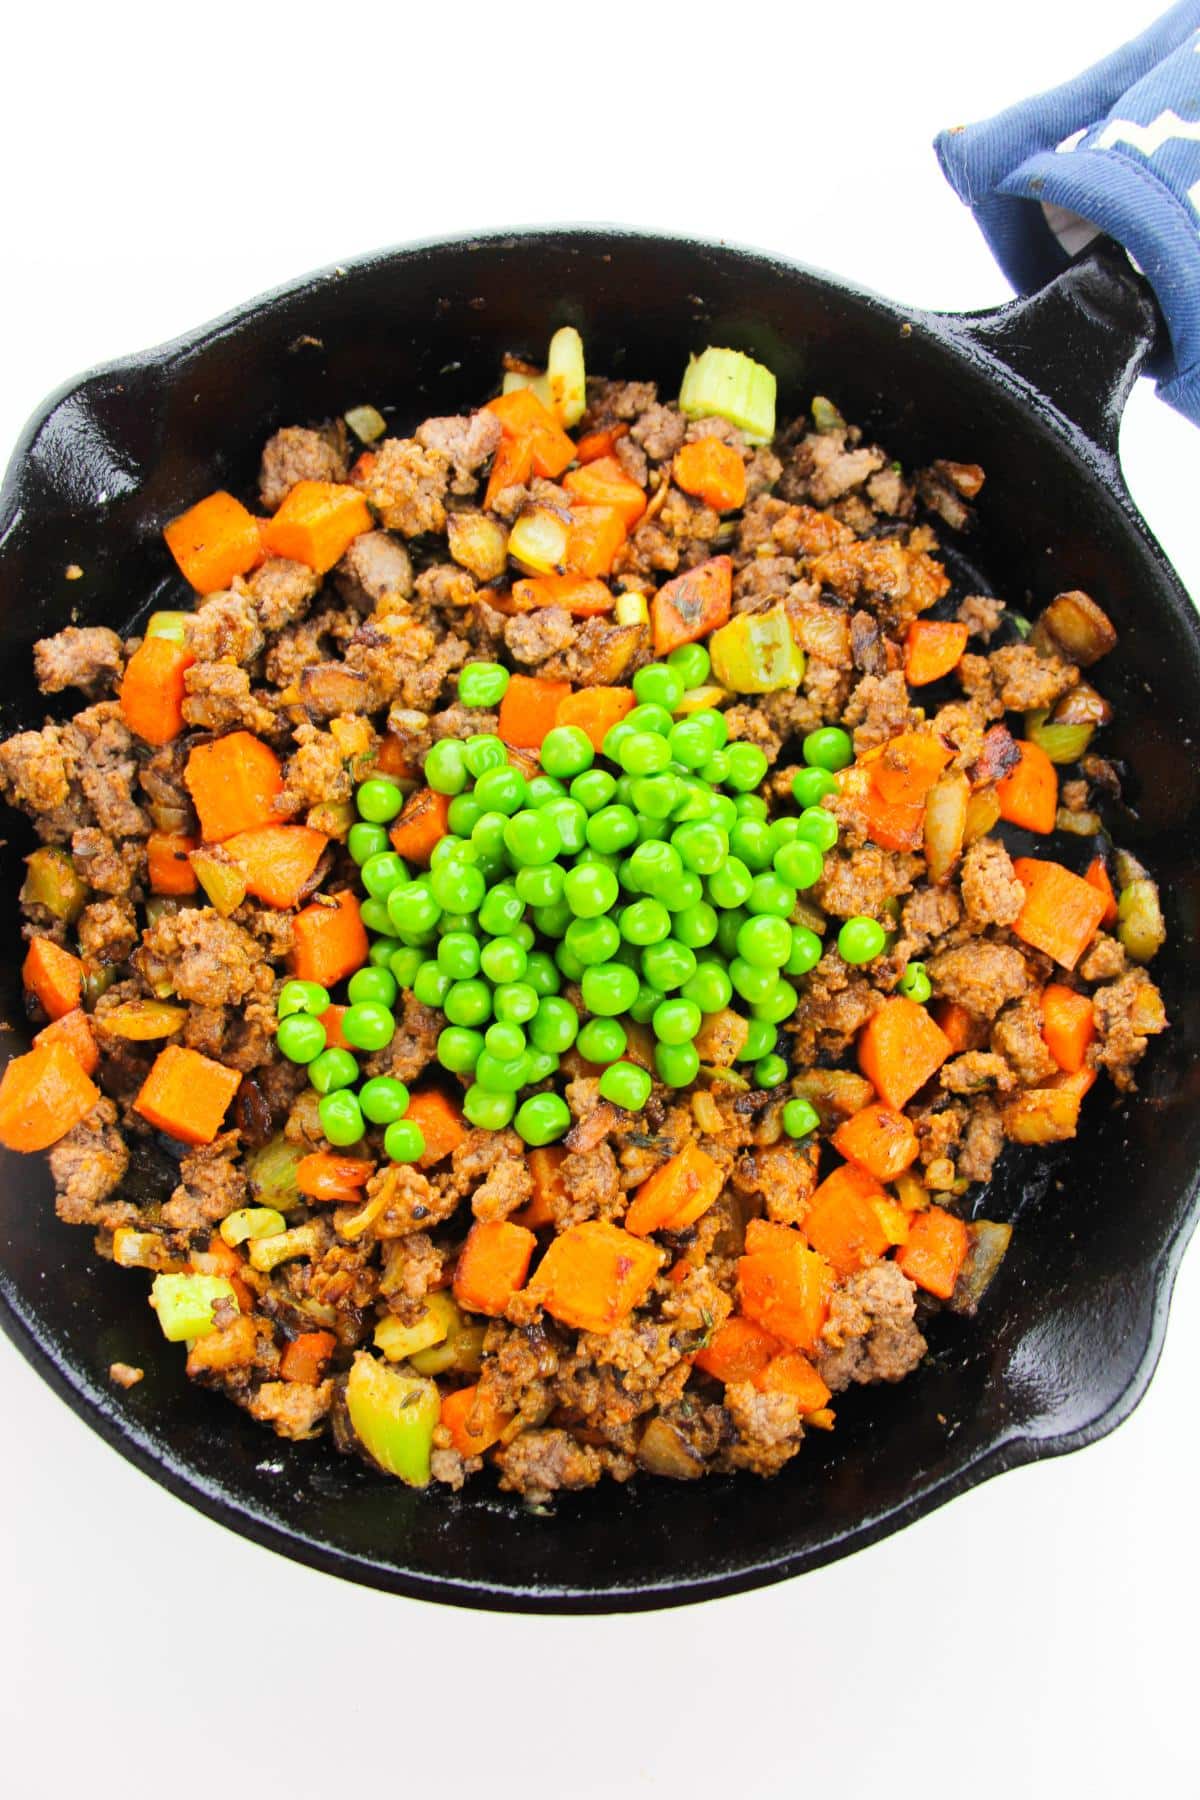 Cooked mixed vegetables, ground beef and green peas in cast iron skillet.